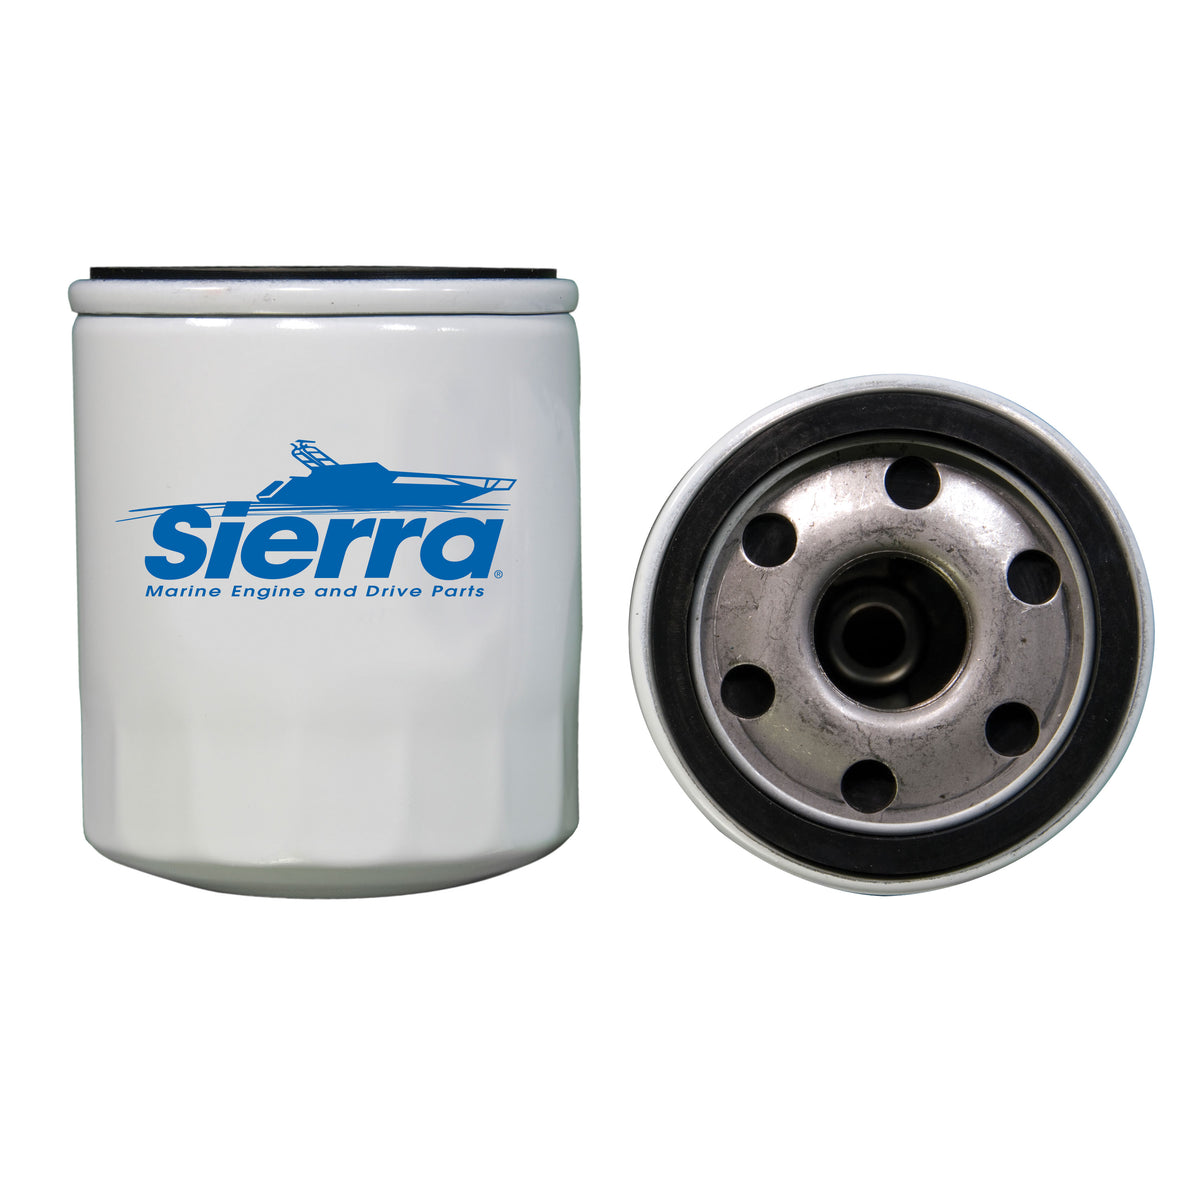 Sierra 18-7921 Replacement for Mercury: 35-896546T, 35-877767K01